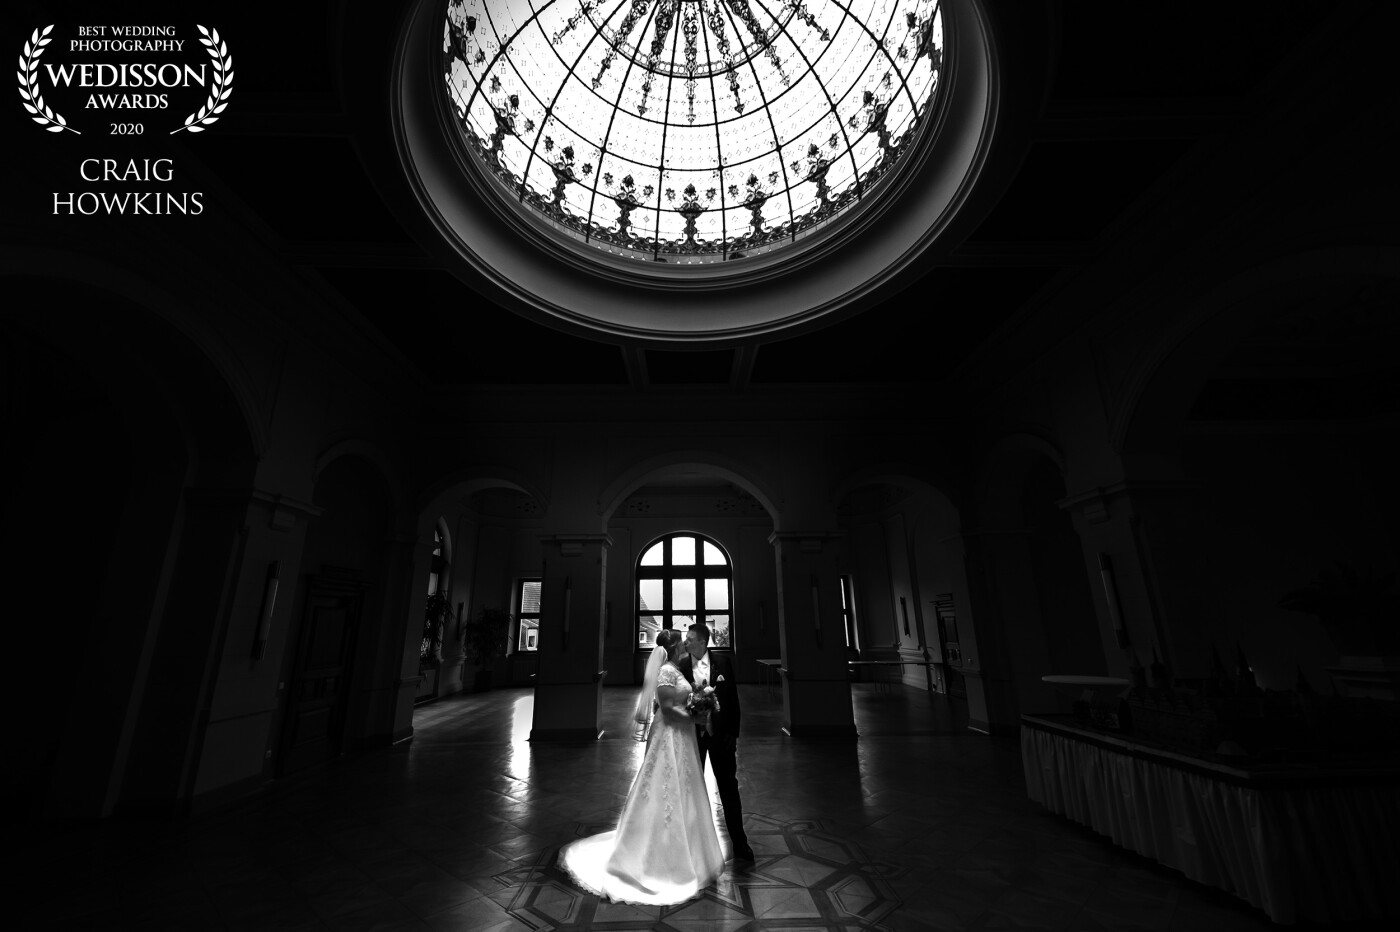 This lovely couple got married in the Ständehaus Merseburg, Germany. Once the wedding ceremony was finished we walked upstairs and found this wonderful dome that has not been used a lot before in wedding photographs. With the light being just right, we captured this wonderful image. It's a photographers dream when everything falls into the right place at the right time. 